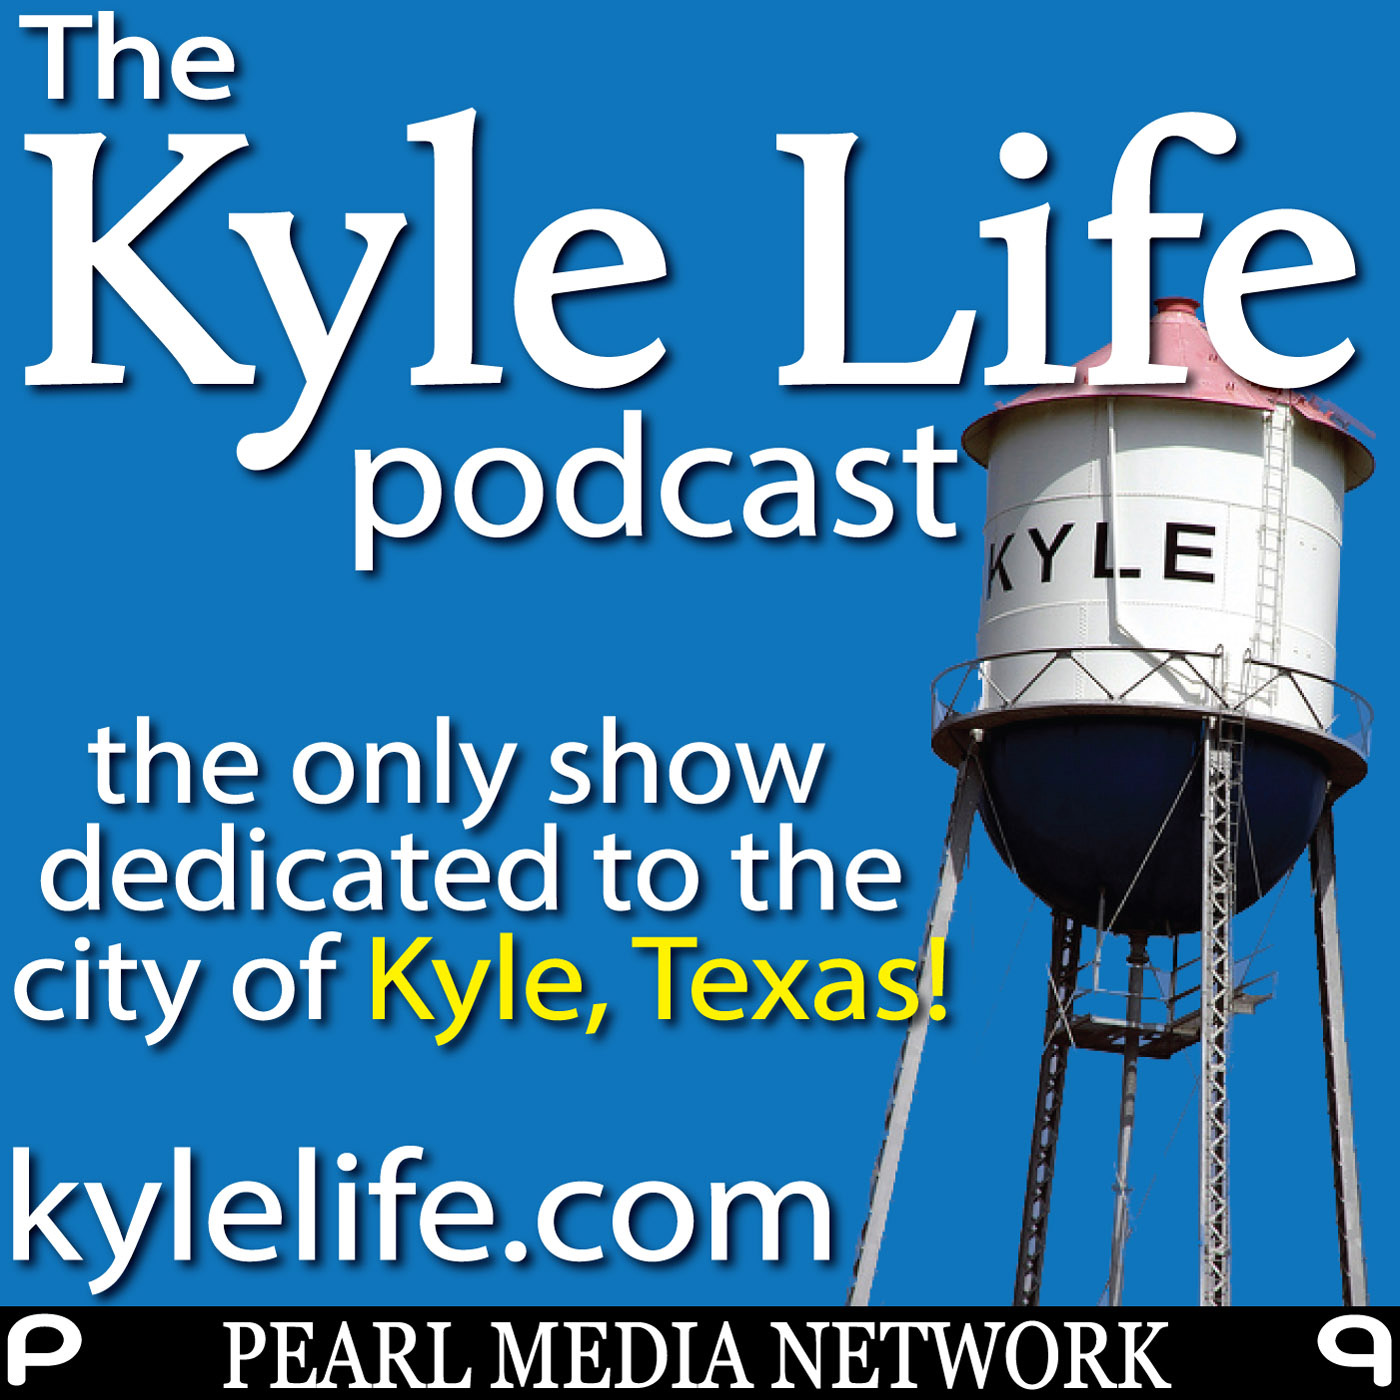 The Kyle Life Podcast – Ep 12 w/ Kevin McAdams of Hays County Radio